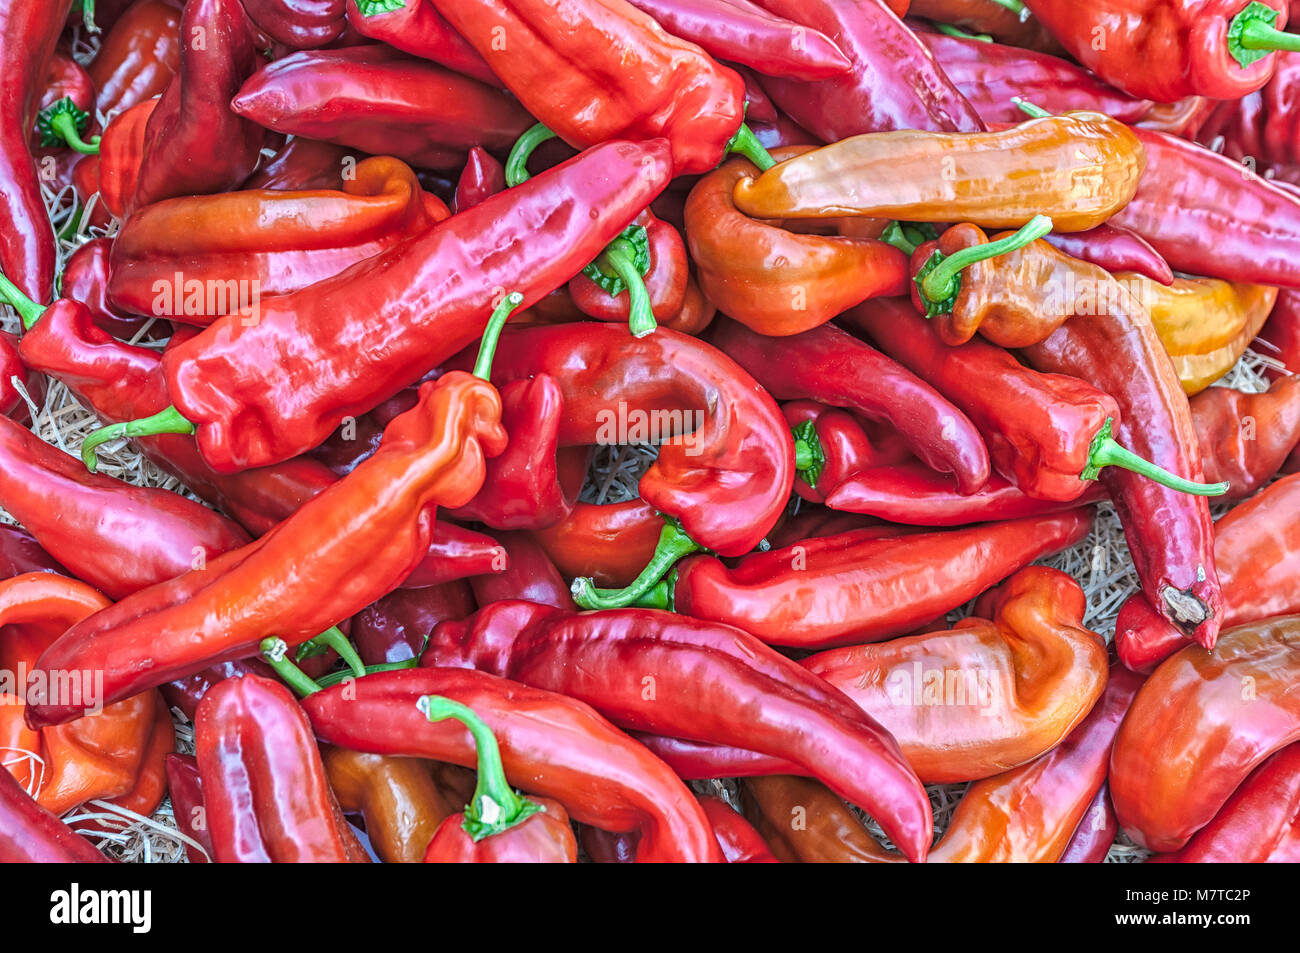 a huge amount of red peppers Stock Photo